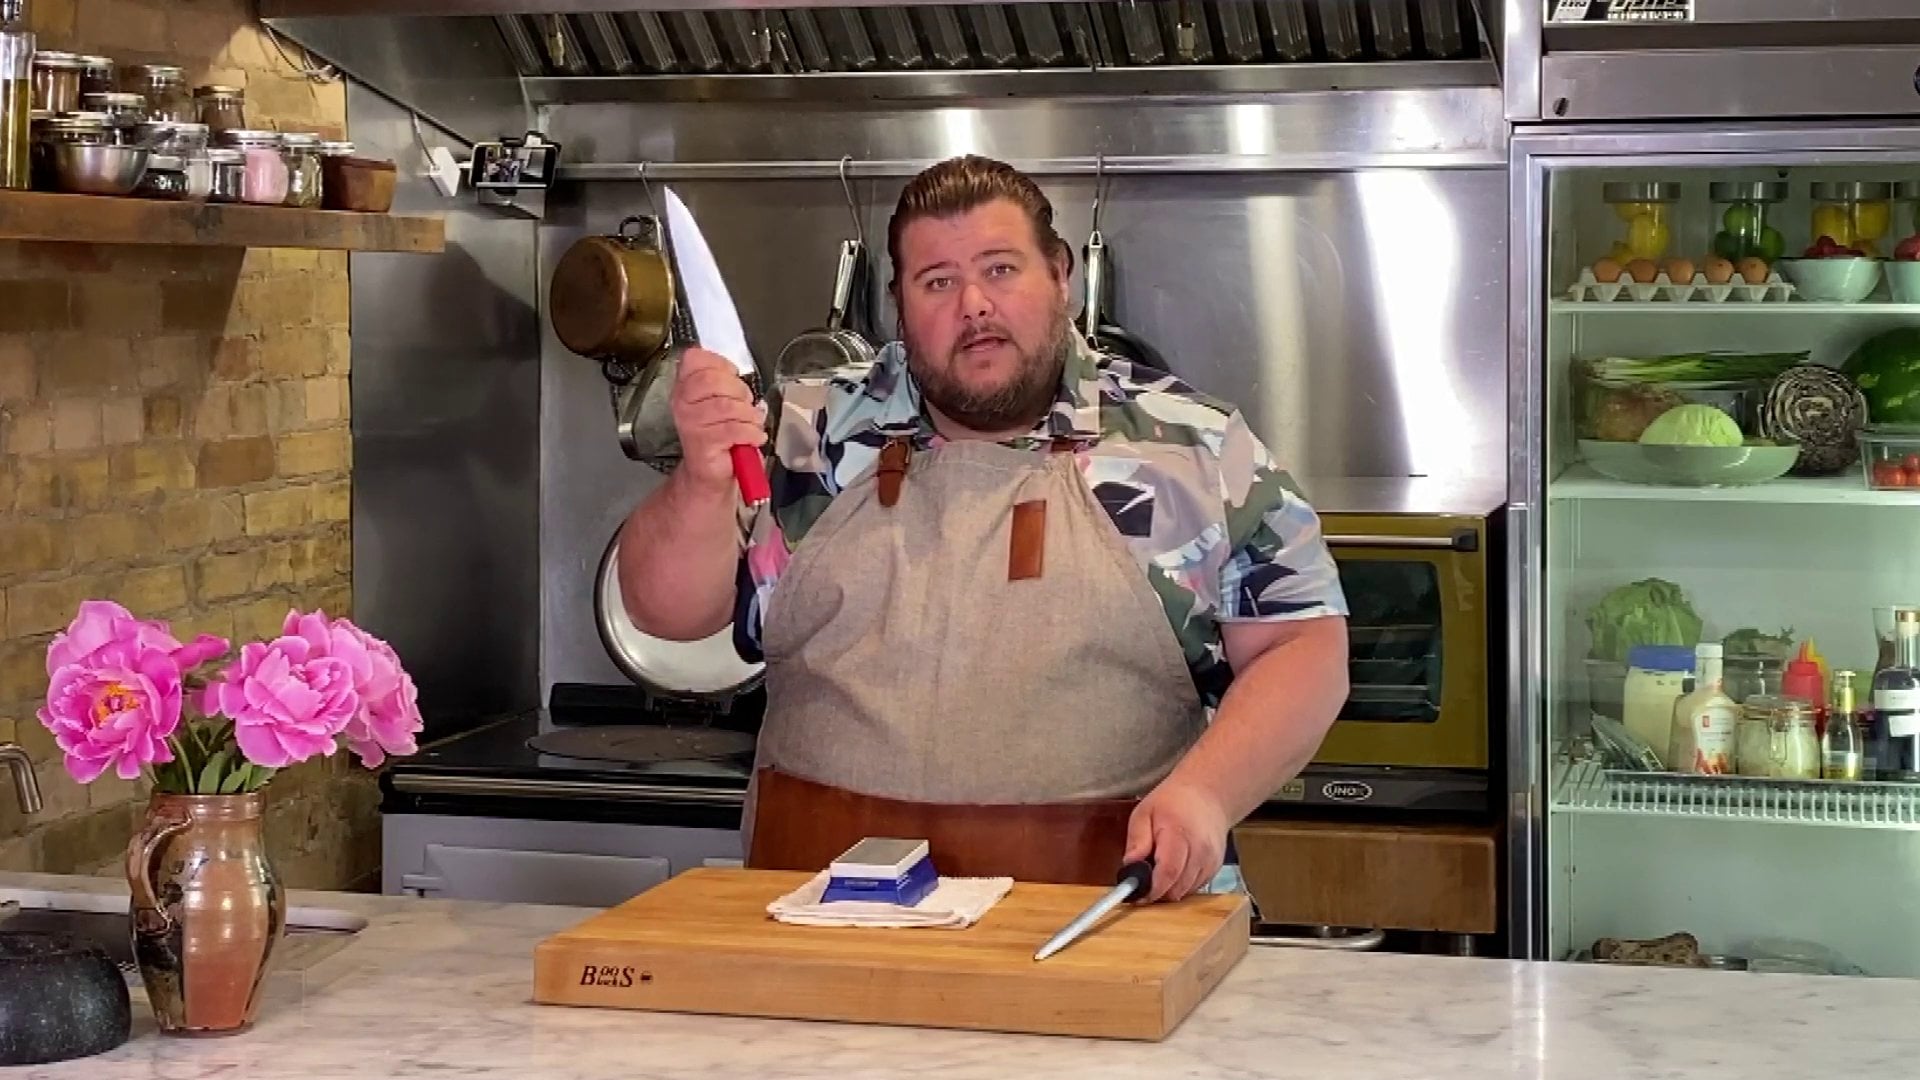 S1 - Rodney’s Tips: How to Sharpen Your Knives